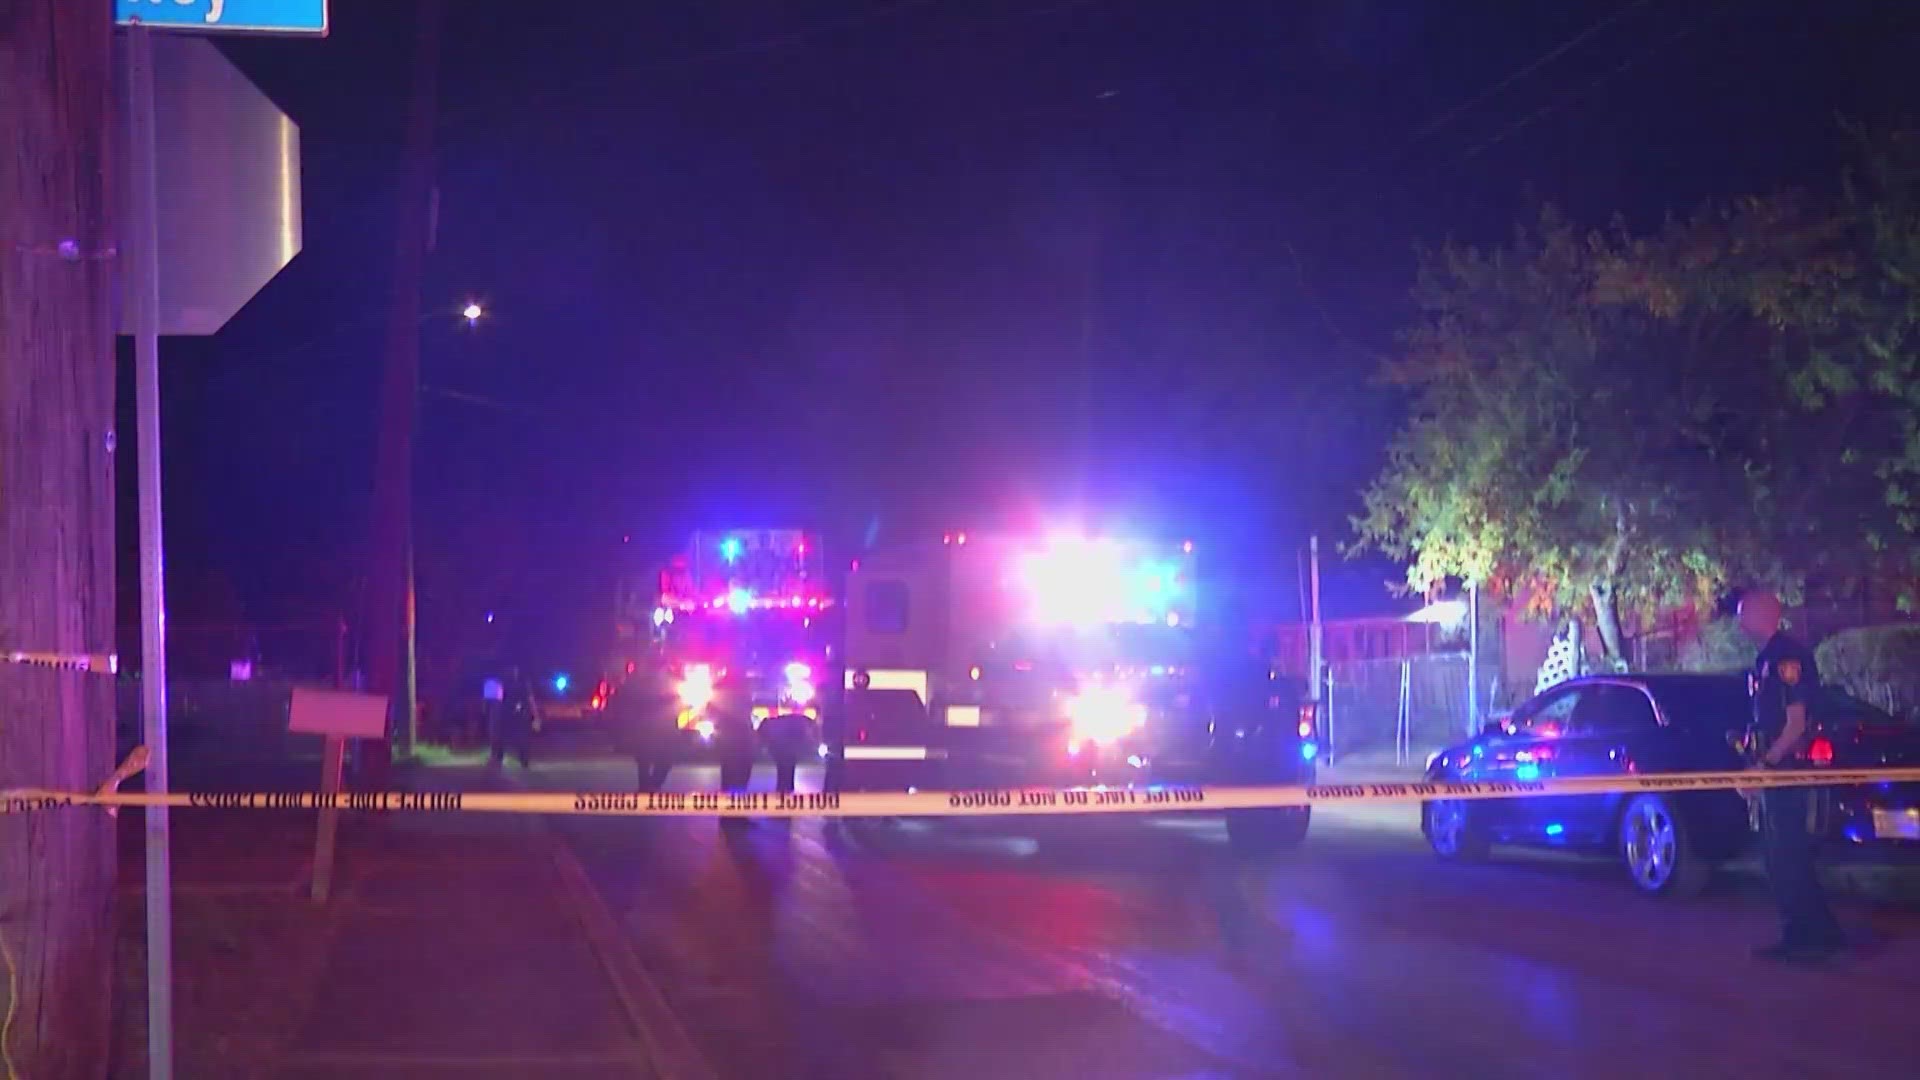 A teenager was shot in a drive-by on the east side of San Antonio late Sunday night, SAPD said. The shooting happened just before midnight along Lincolnshire Drive.